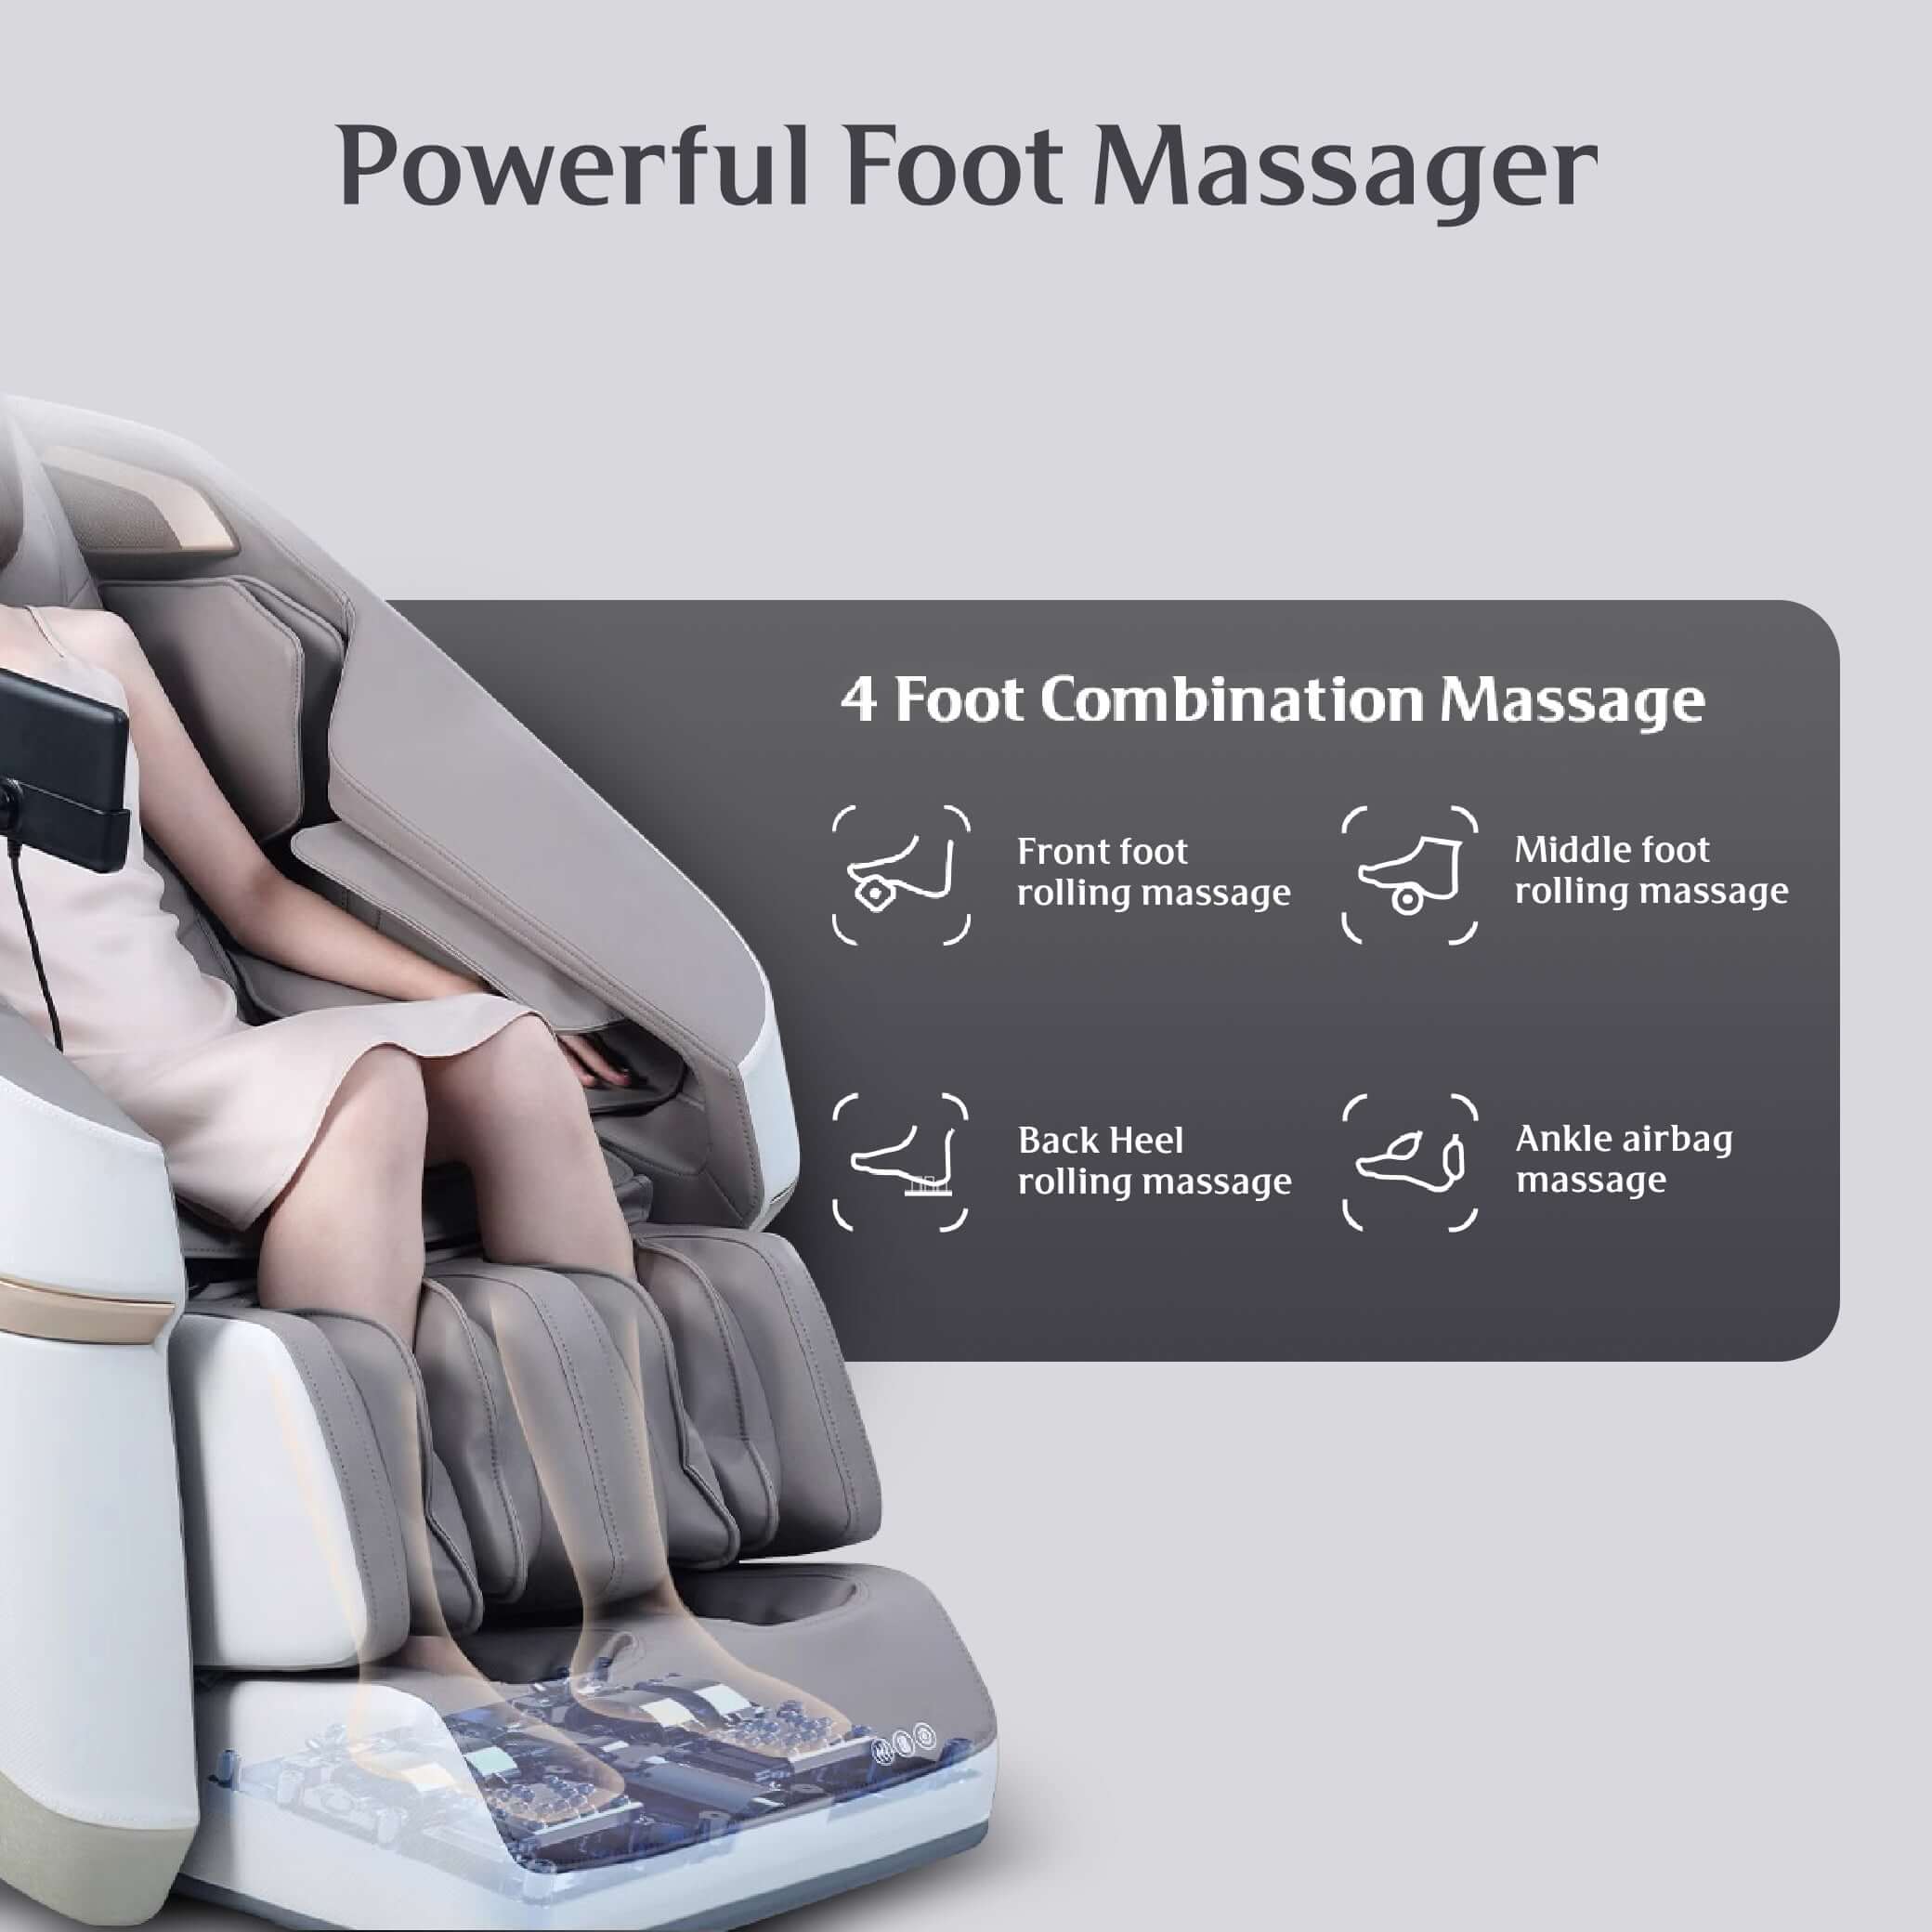 Grey Jimny Massage Chair with powerful foot massager featuring 4 combination modes for ultimate relaxation and comfort.